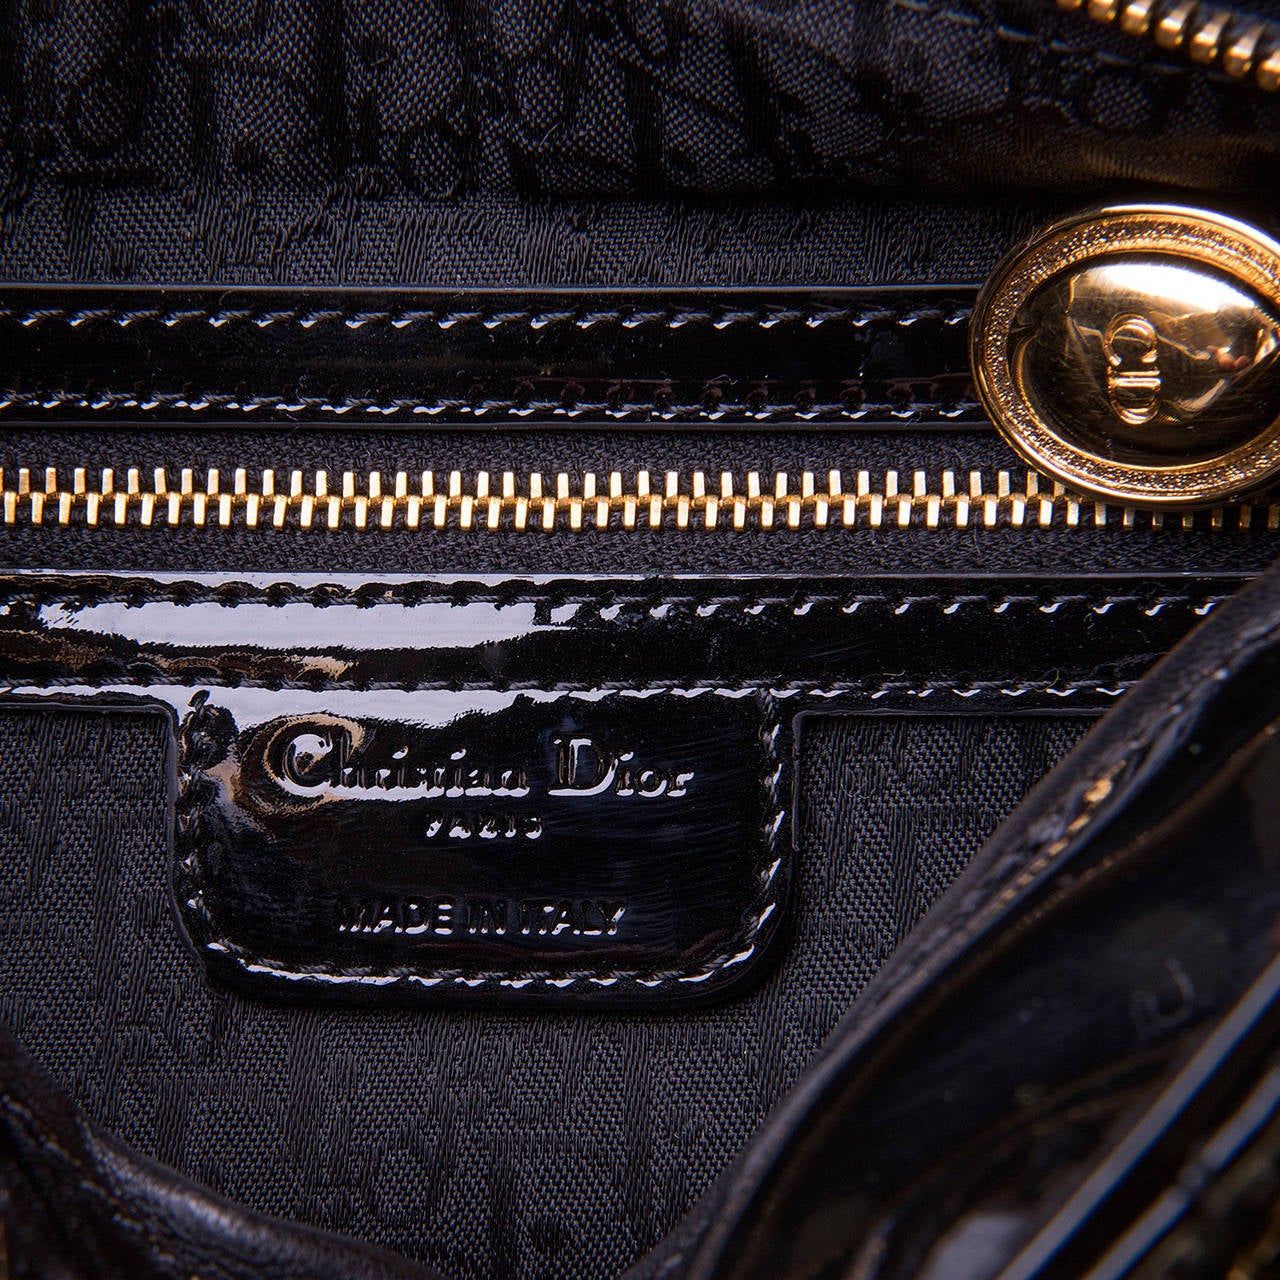 A WOW! 'Lady Dior' Bag, Black Patent Leather and Gold Hardware at 1stdibs